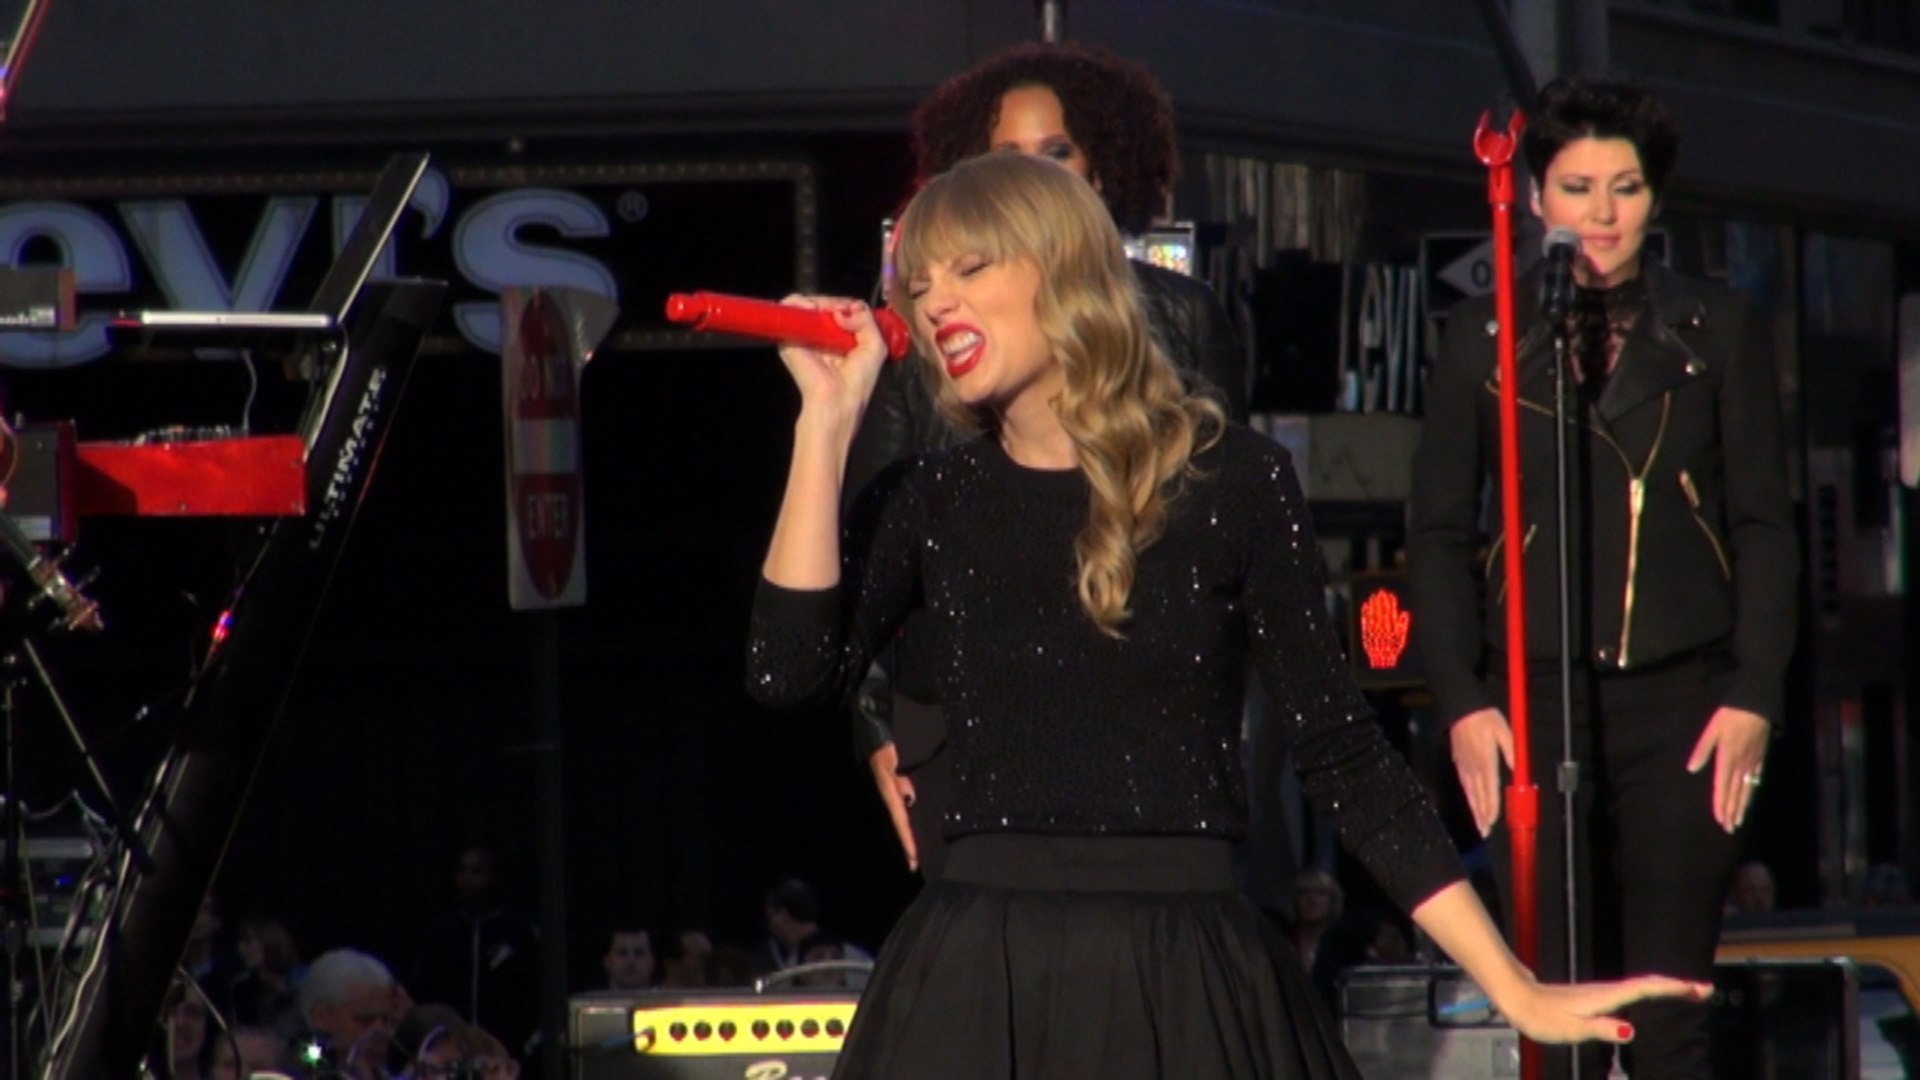 Exclusive Interview With Taylor Swift On Red Tour In China